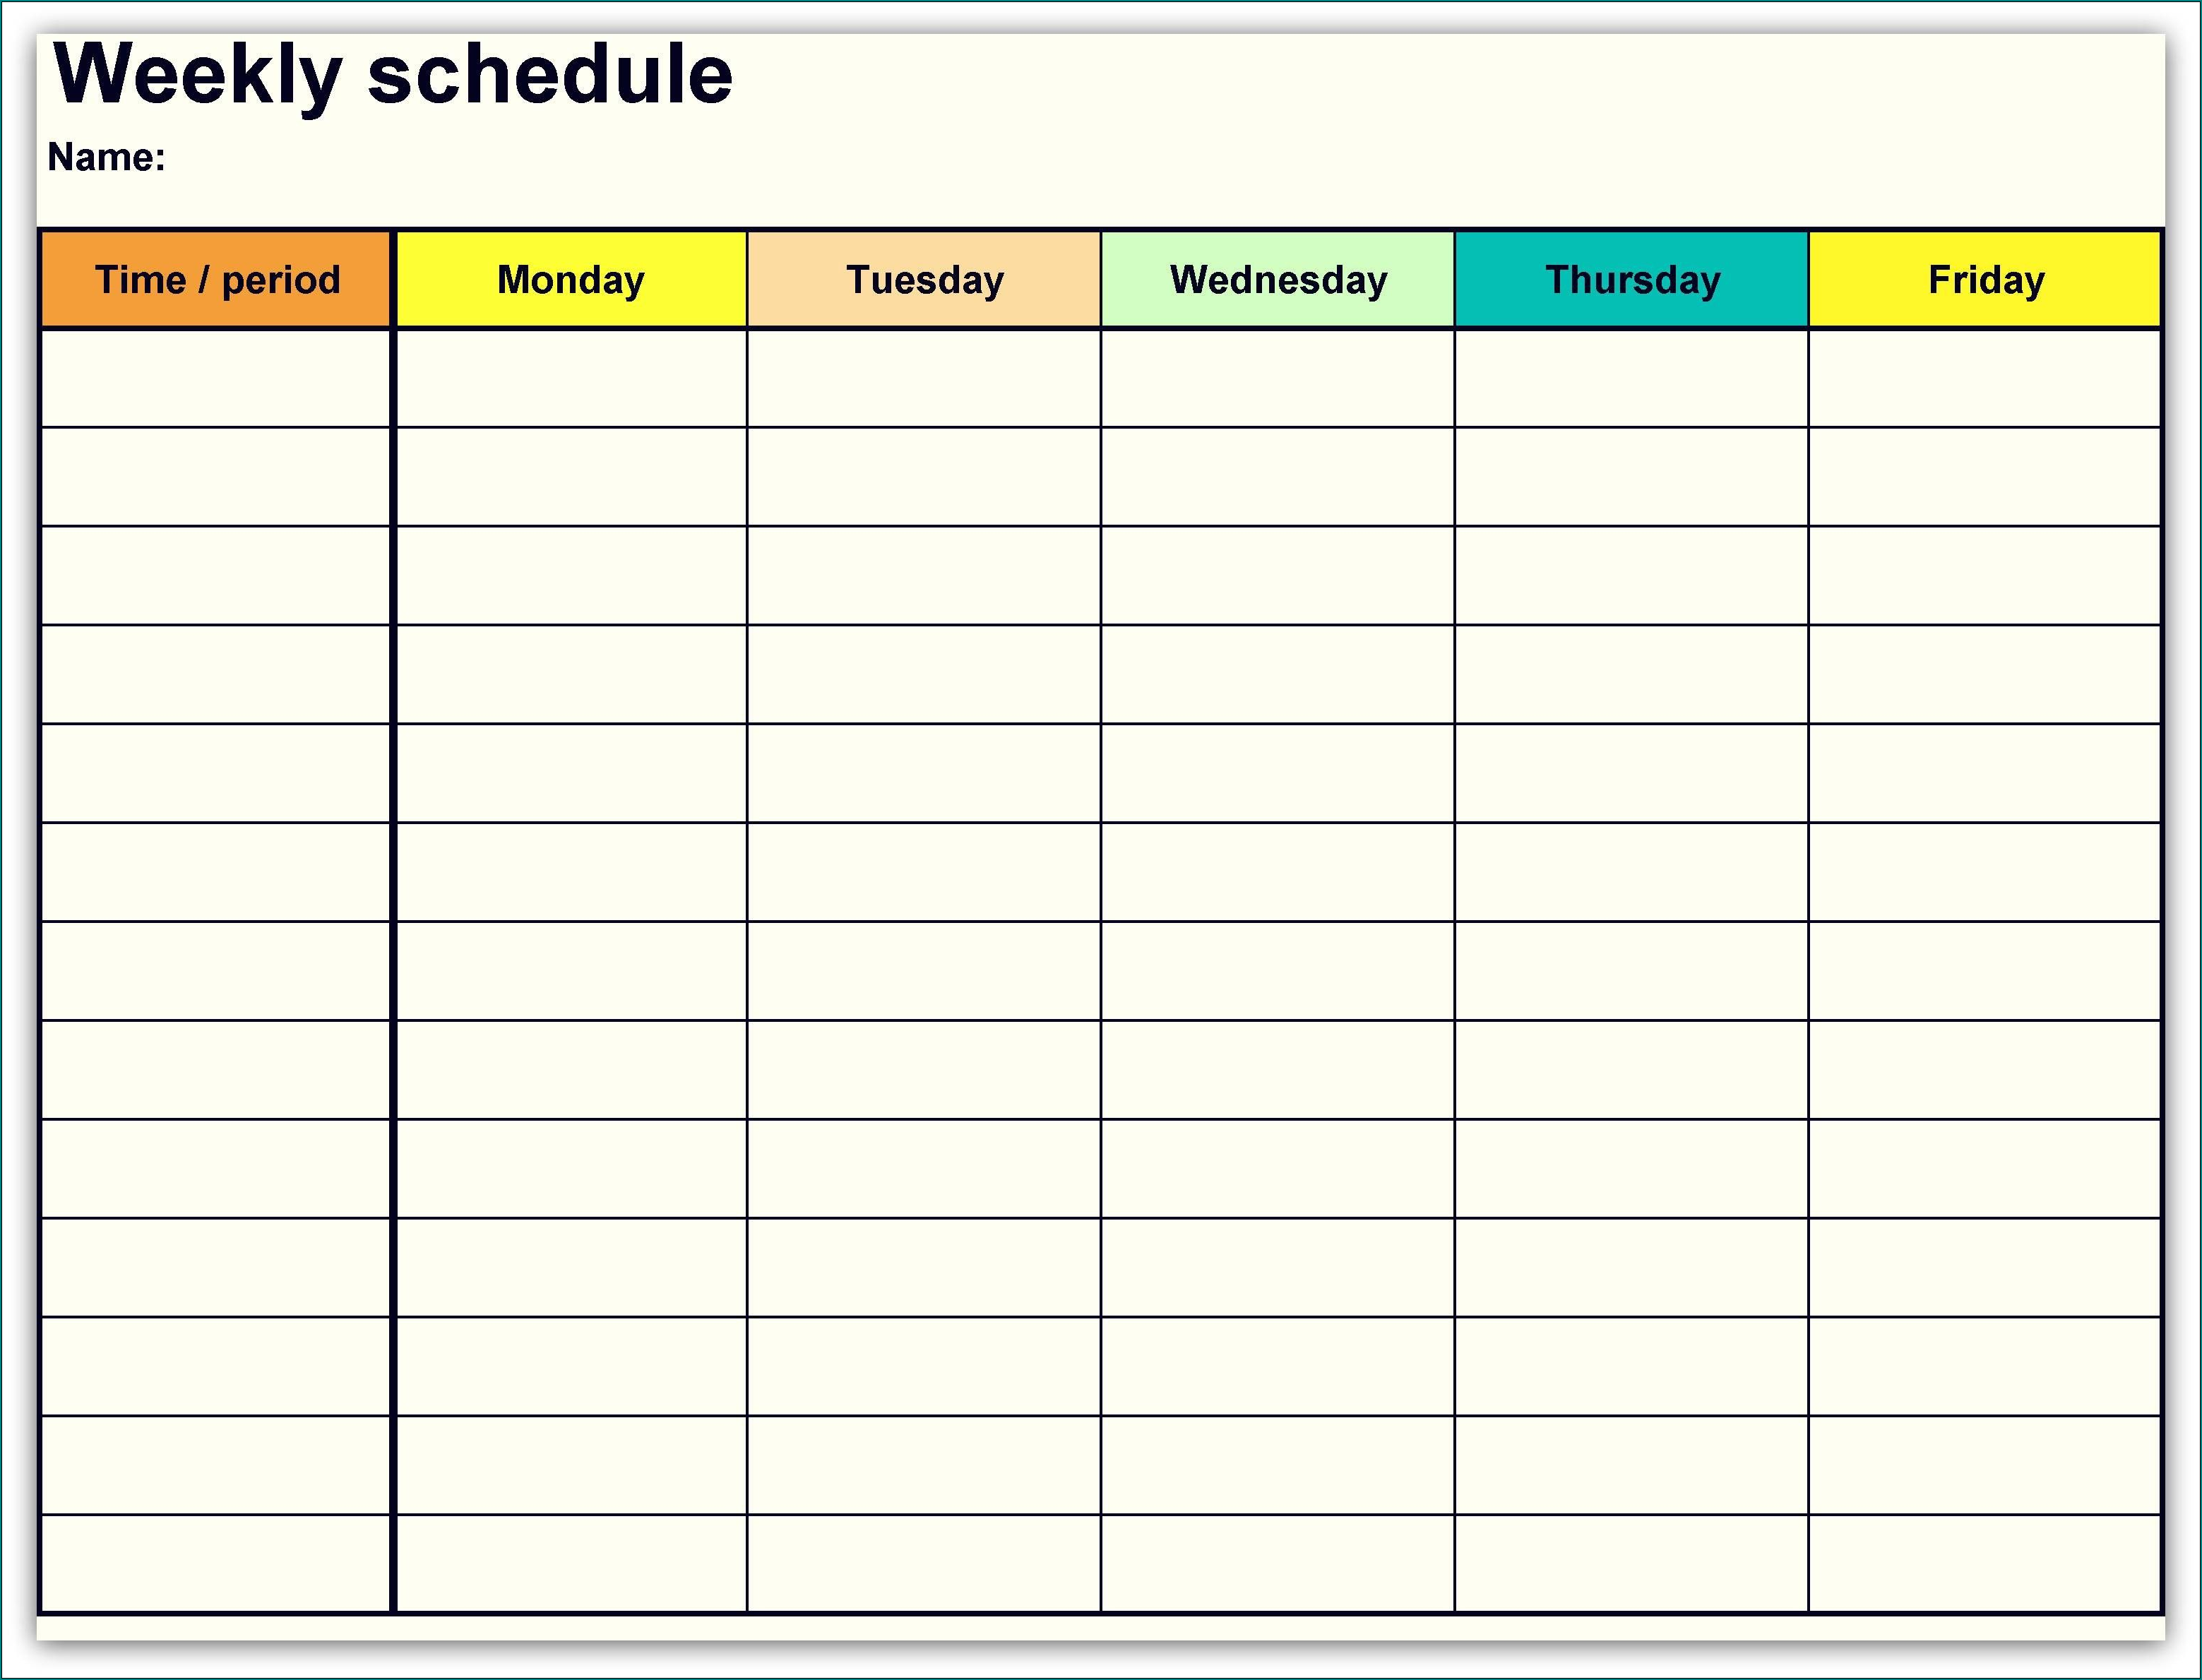 Example of Weekly Schedule Template